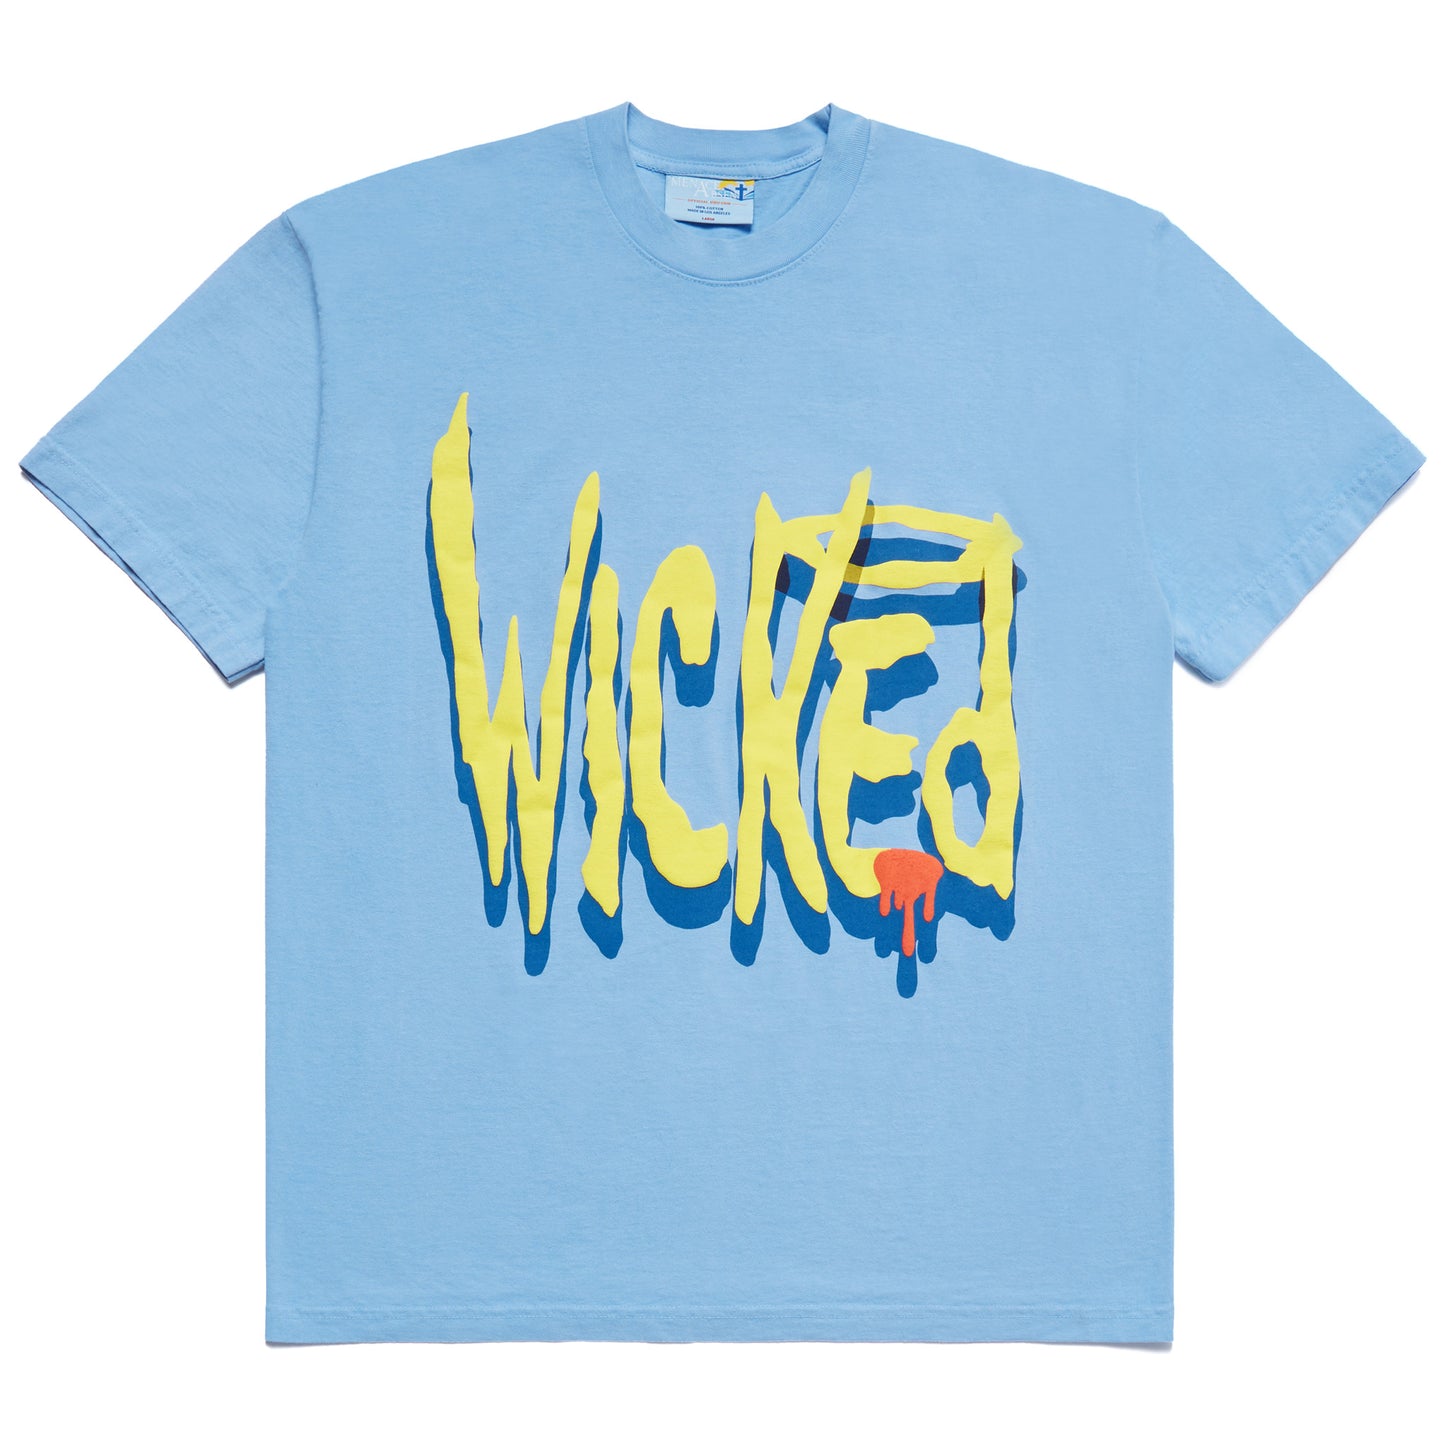 WICKED T-SHIRT by MENACE